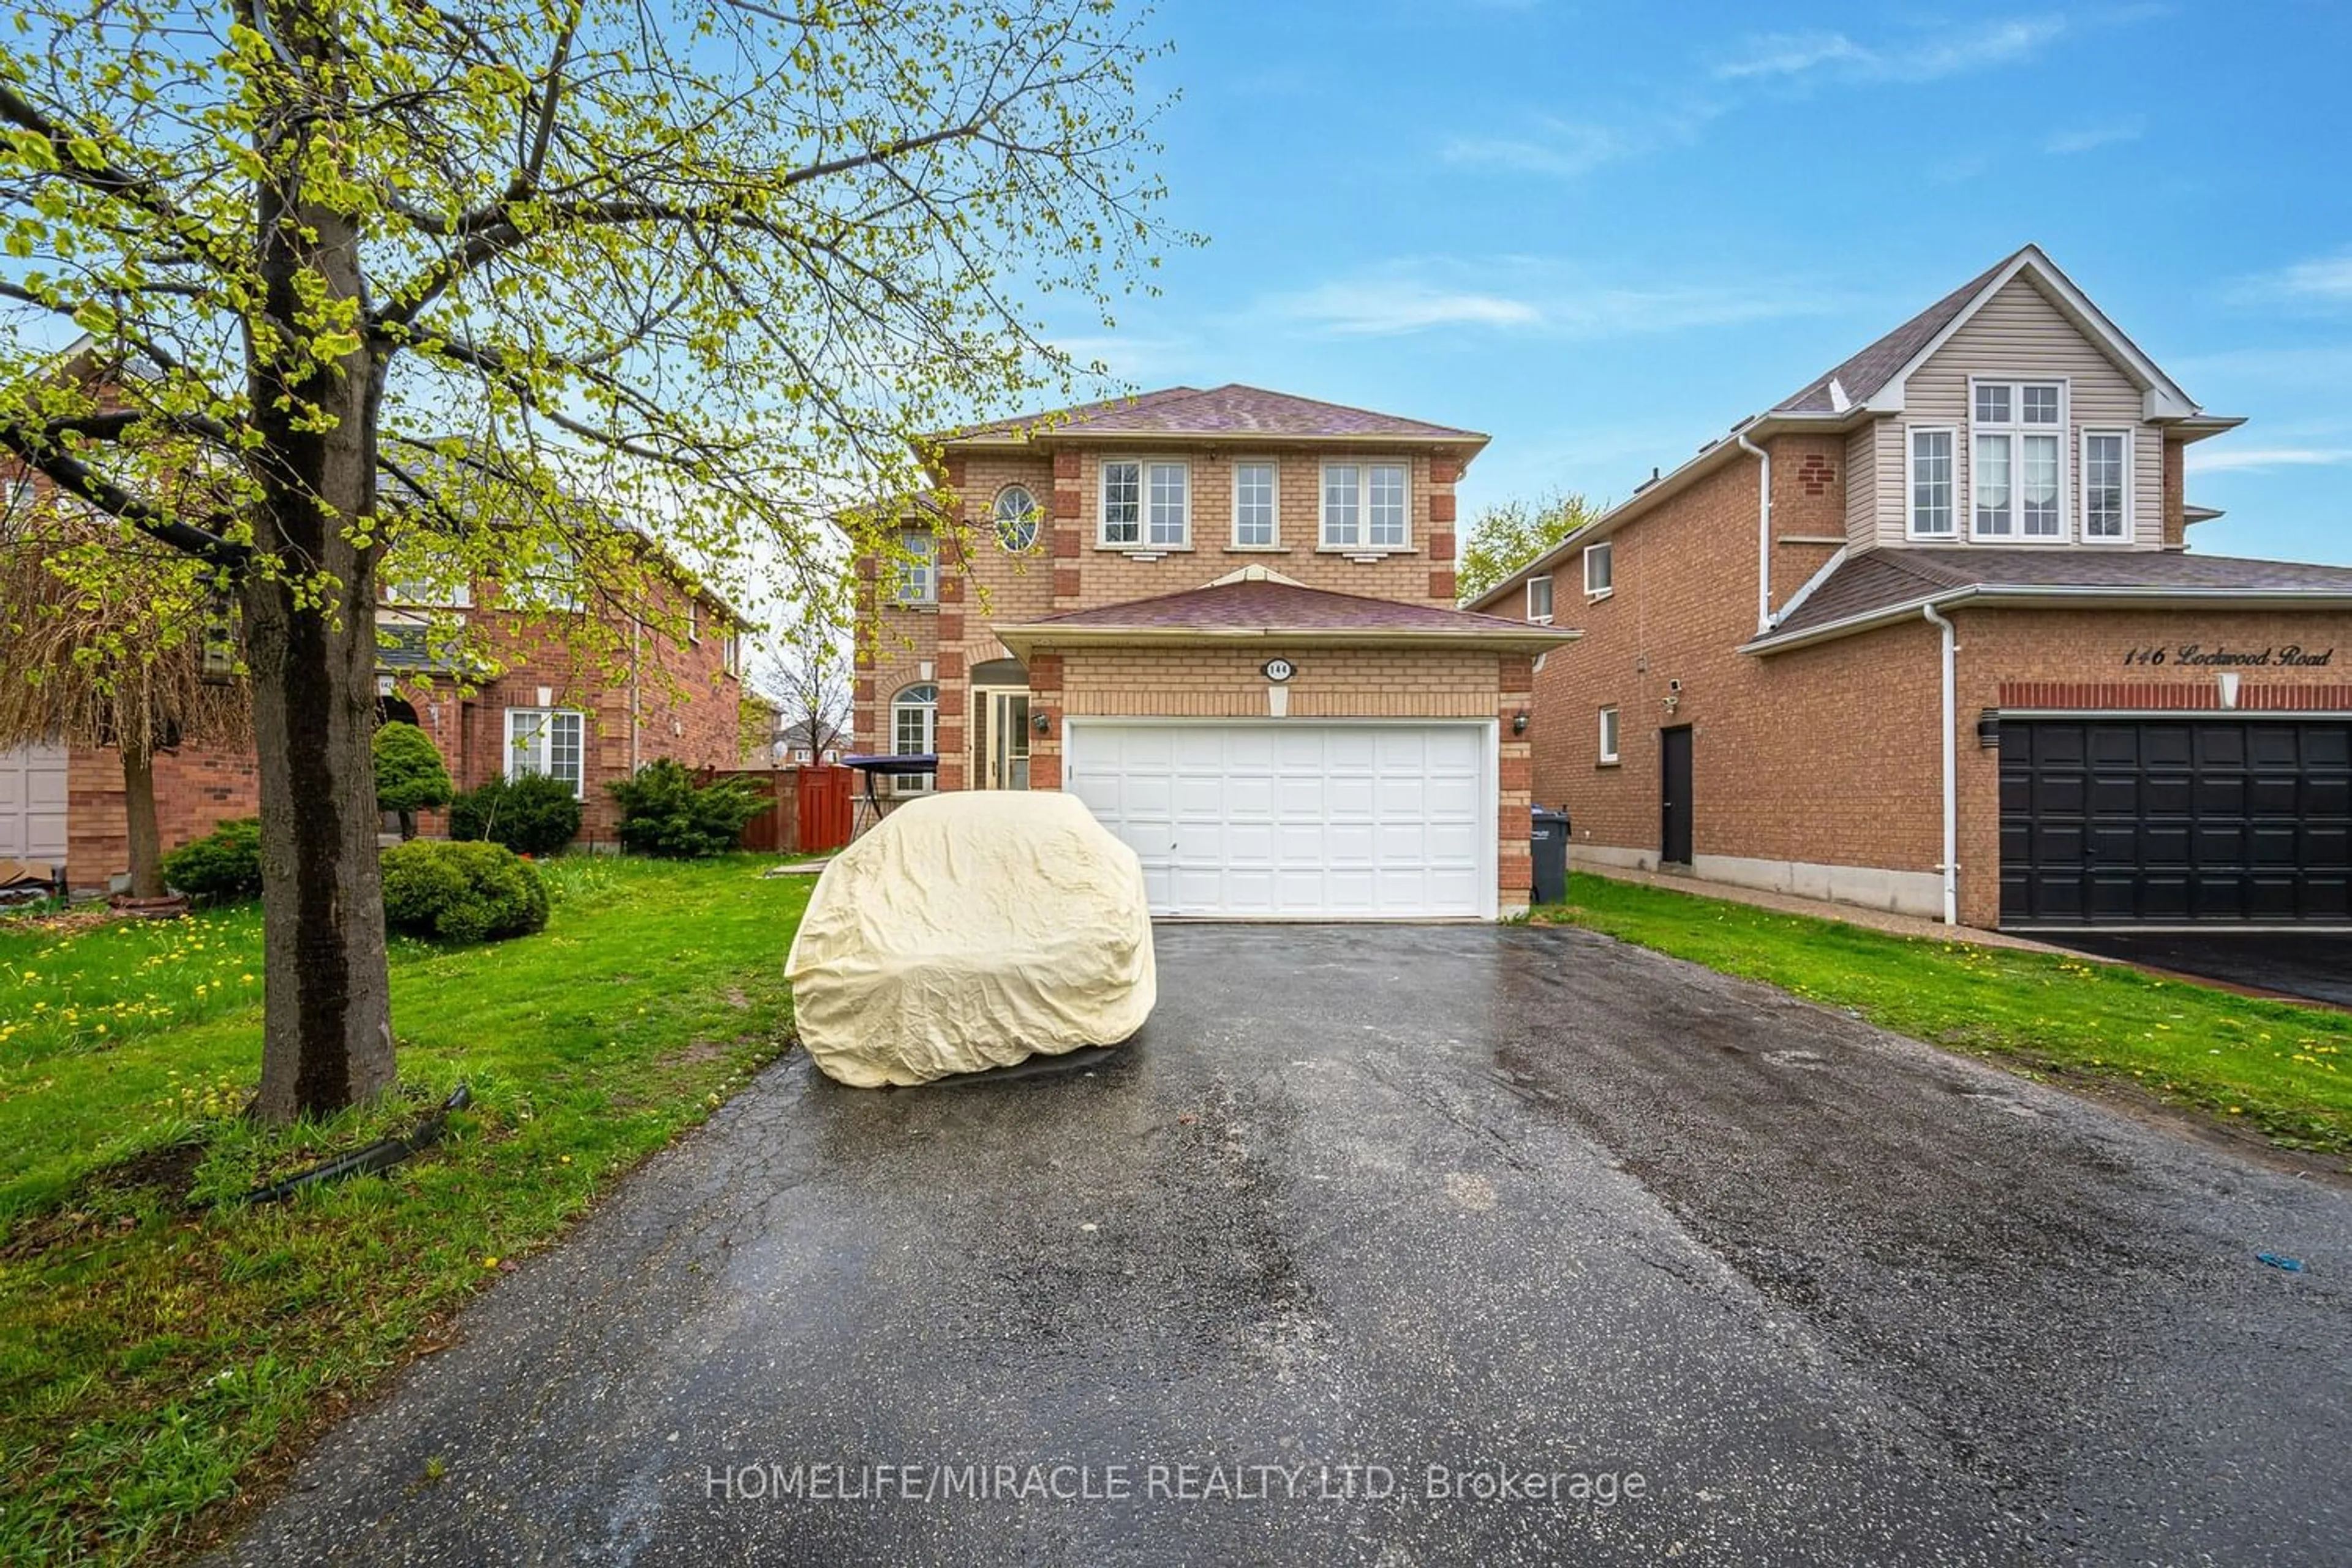 Frontside or backside of a home for 144 Lockwood Rd, Brampton Ontario L6Y 4Z2